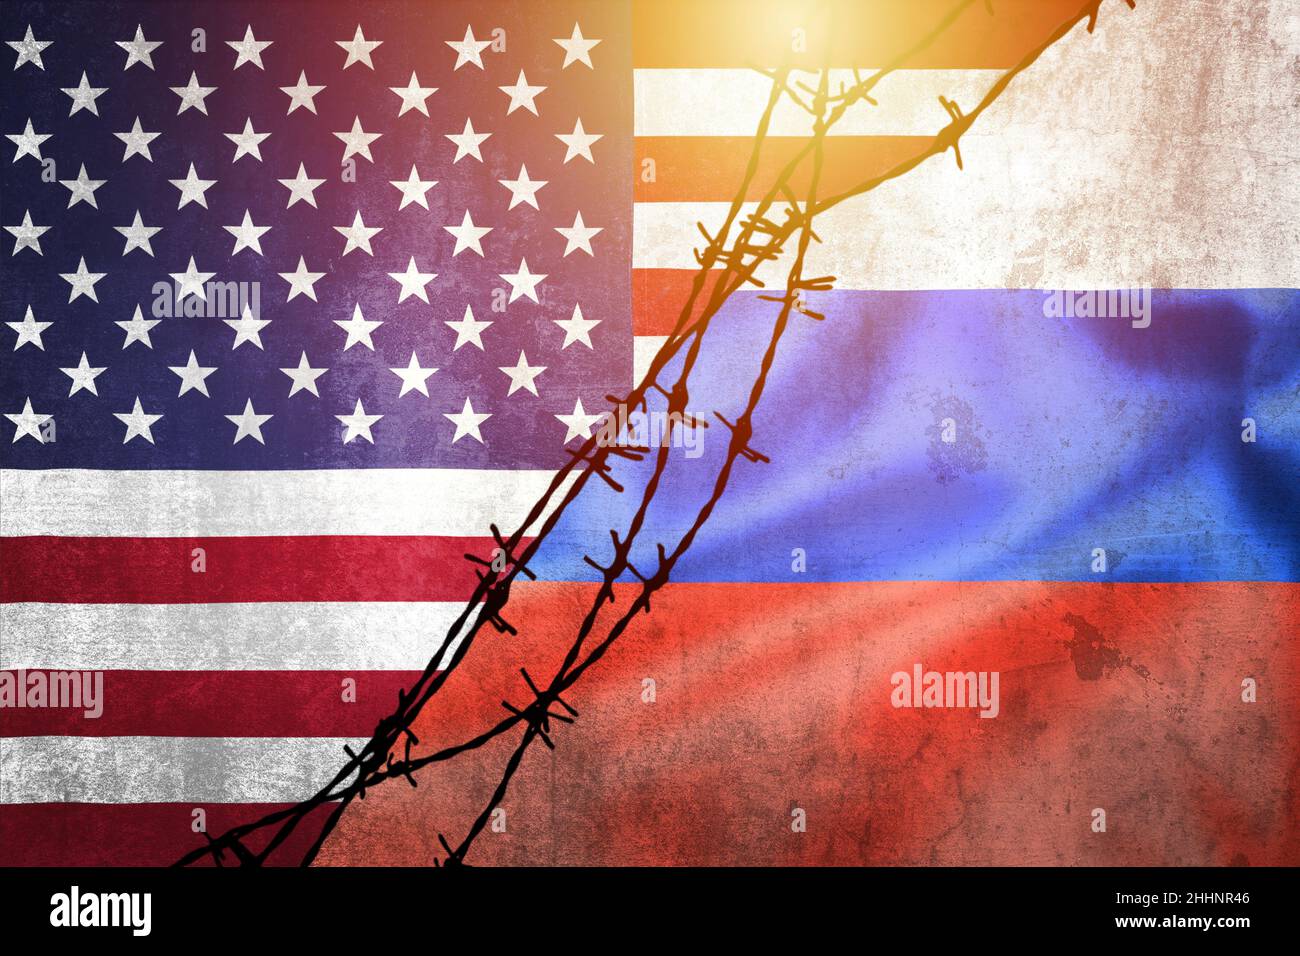 Grunge flags of Russian Federation and USA divided by barb wire sun haze illustration, concept of tense relations between west and Russia Stock Photo